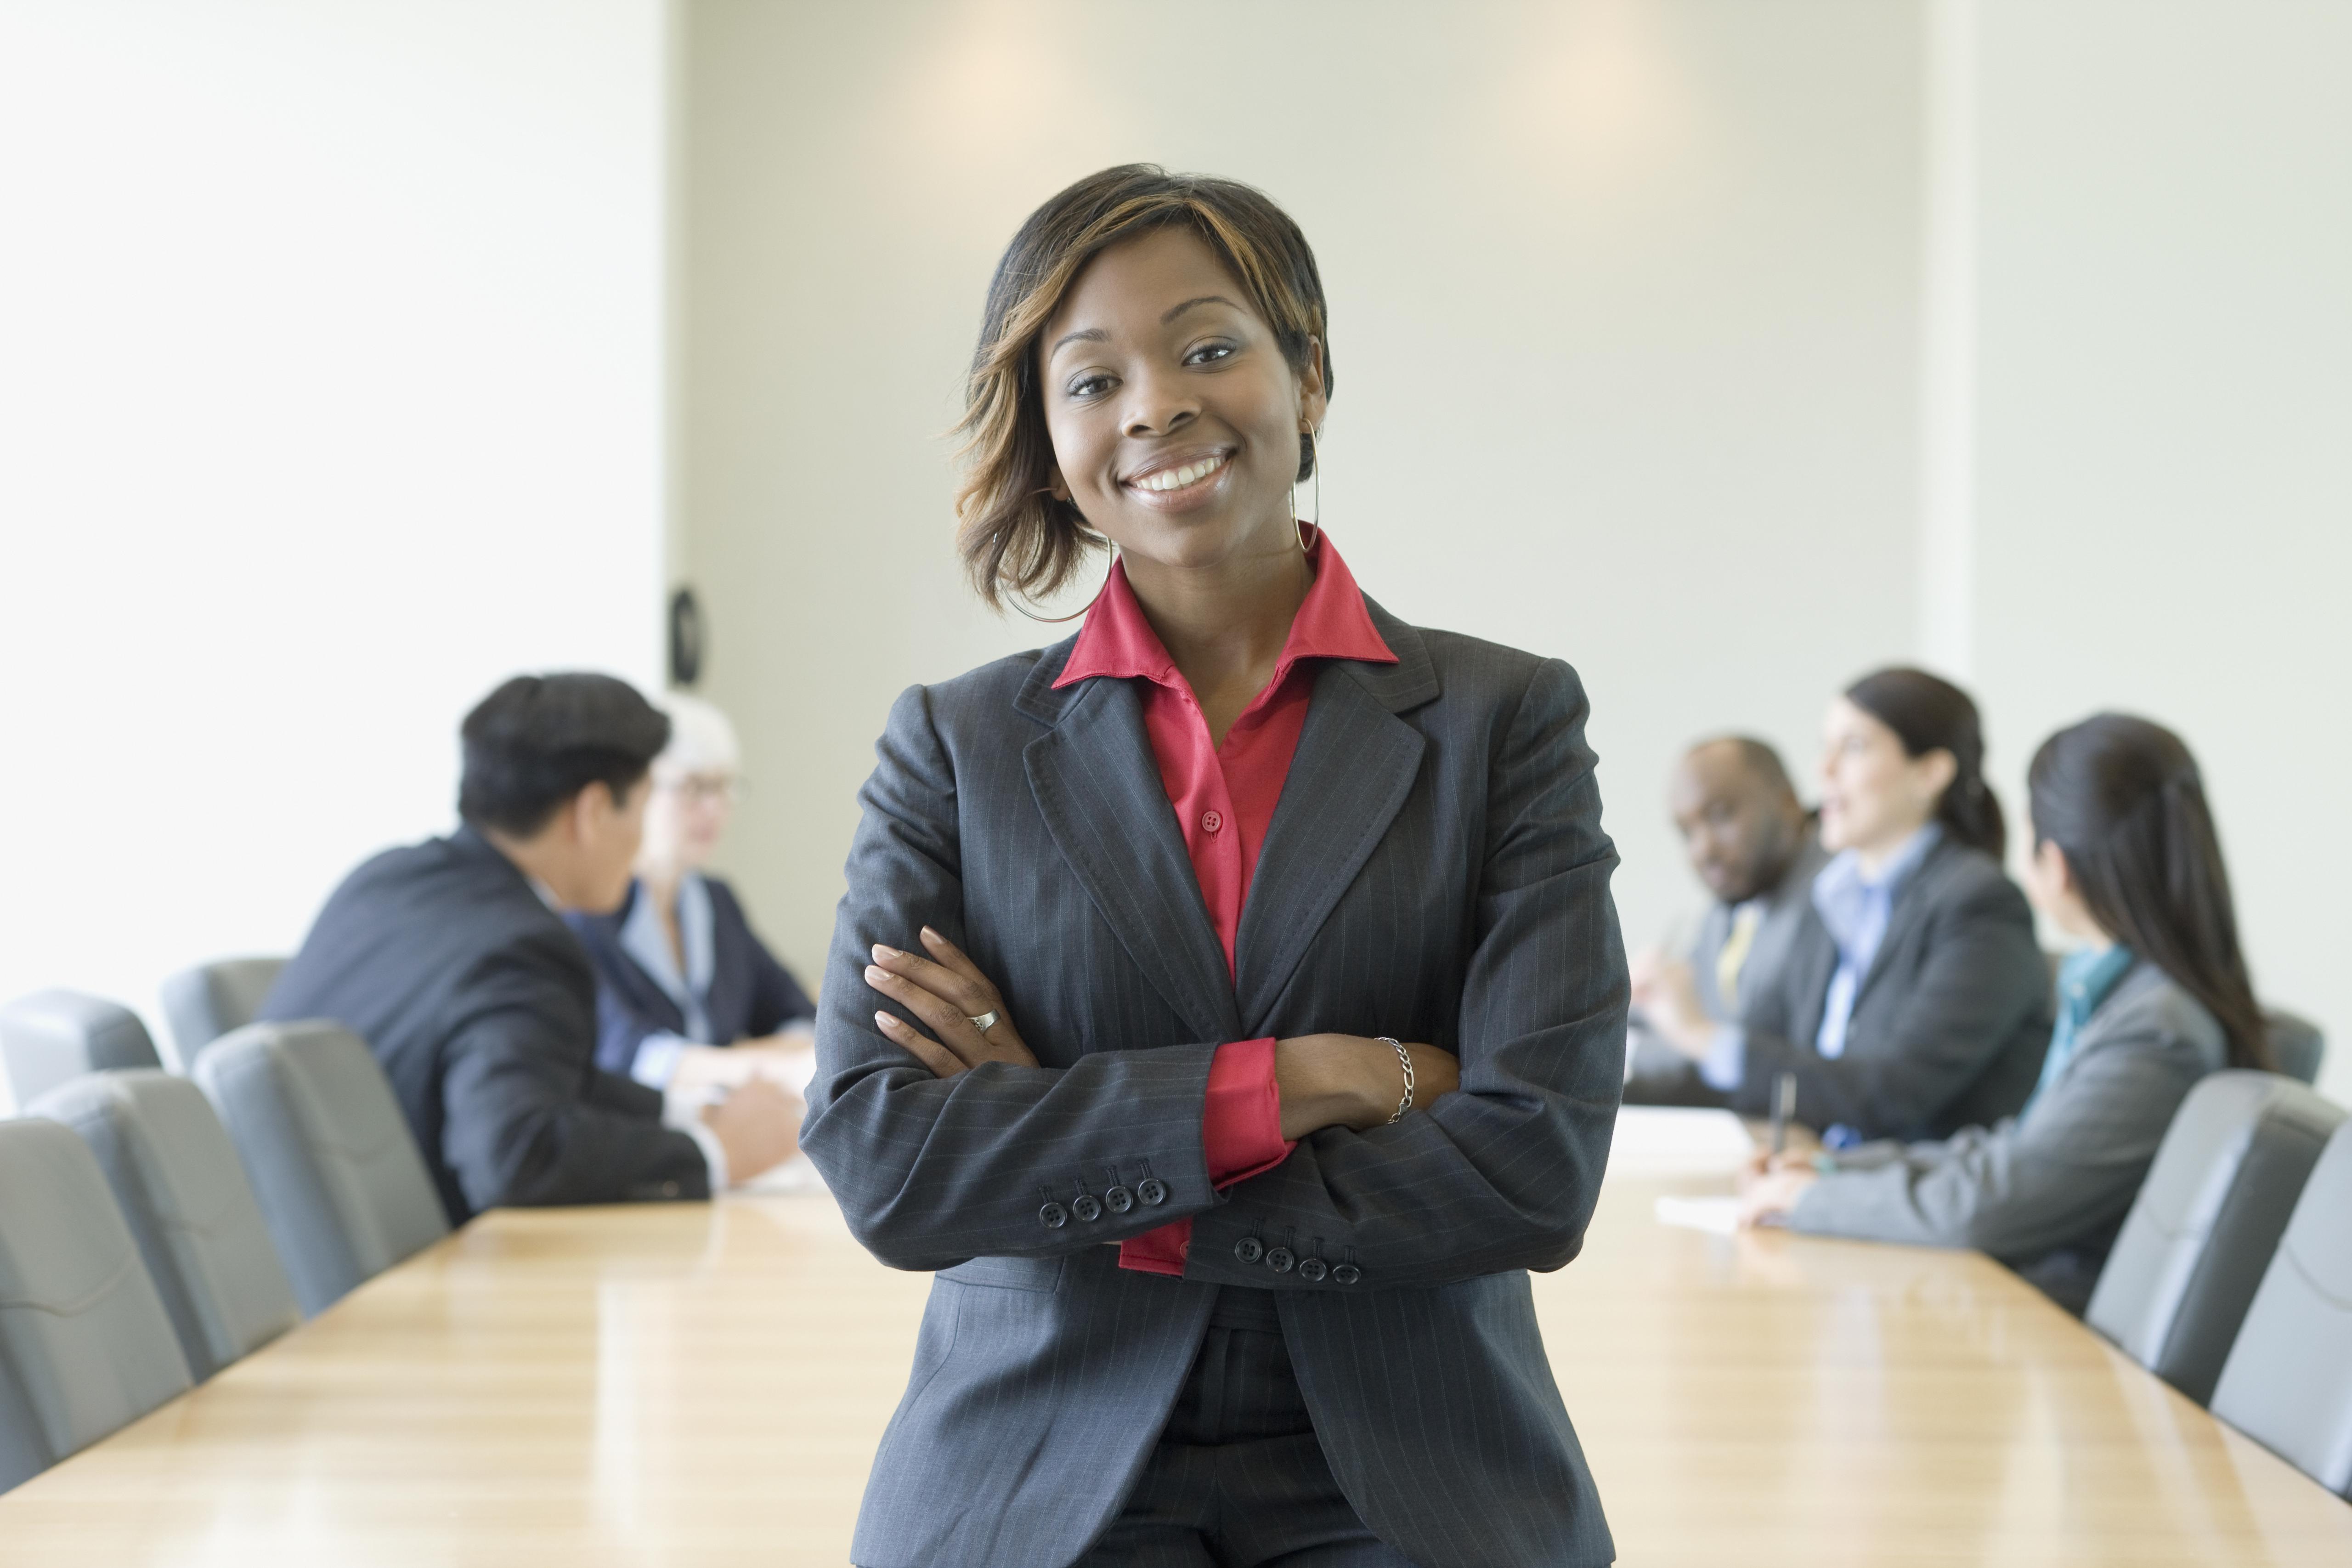 Black businesswoman in conference room with co-workers